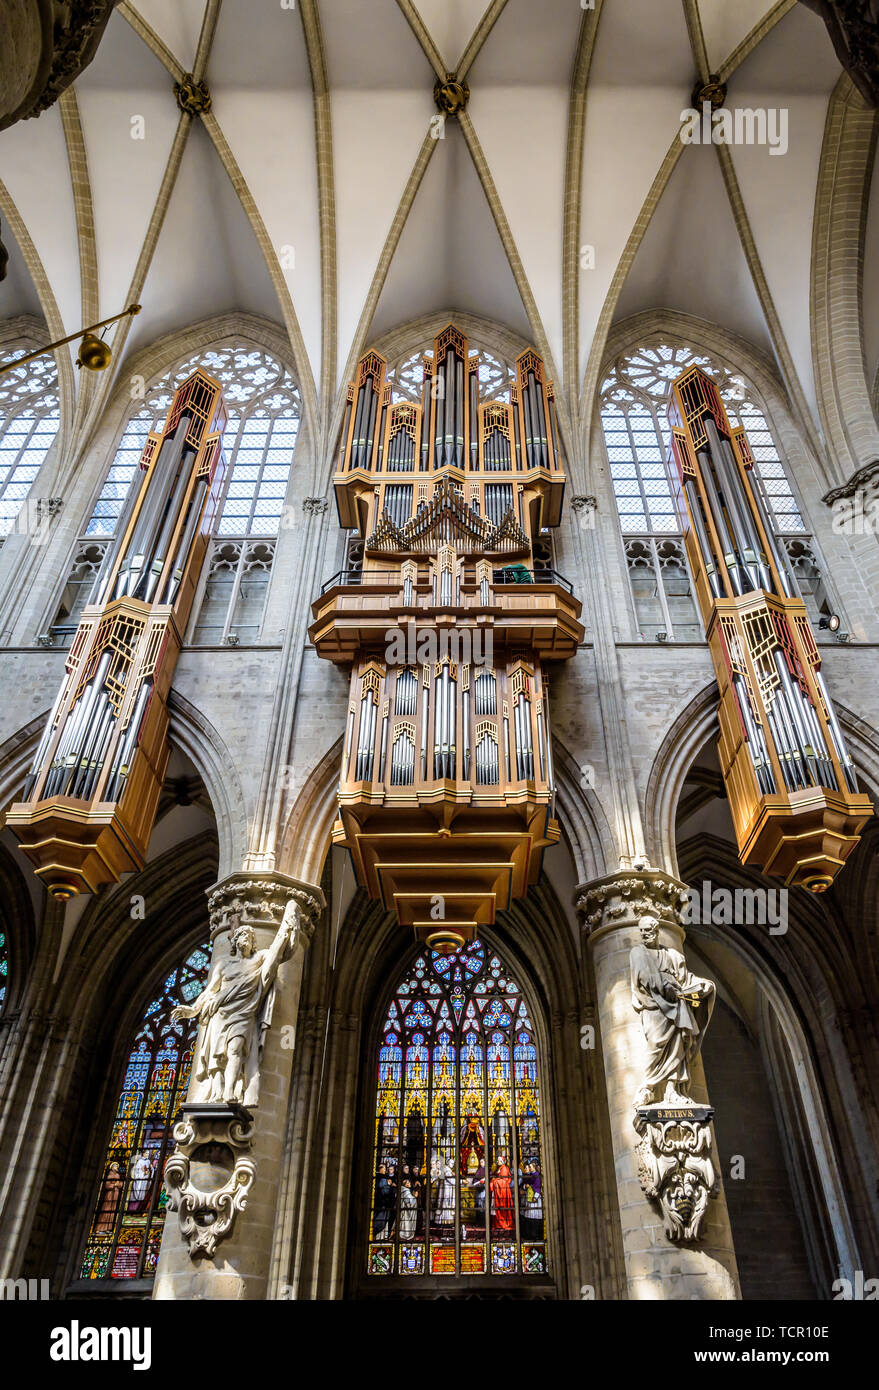 Low angle view of the great organ in the nave of the Cathedral of St. Michael and St. Gudula in Brussels, Belgium. Stock Photo